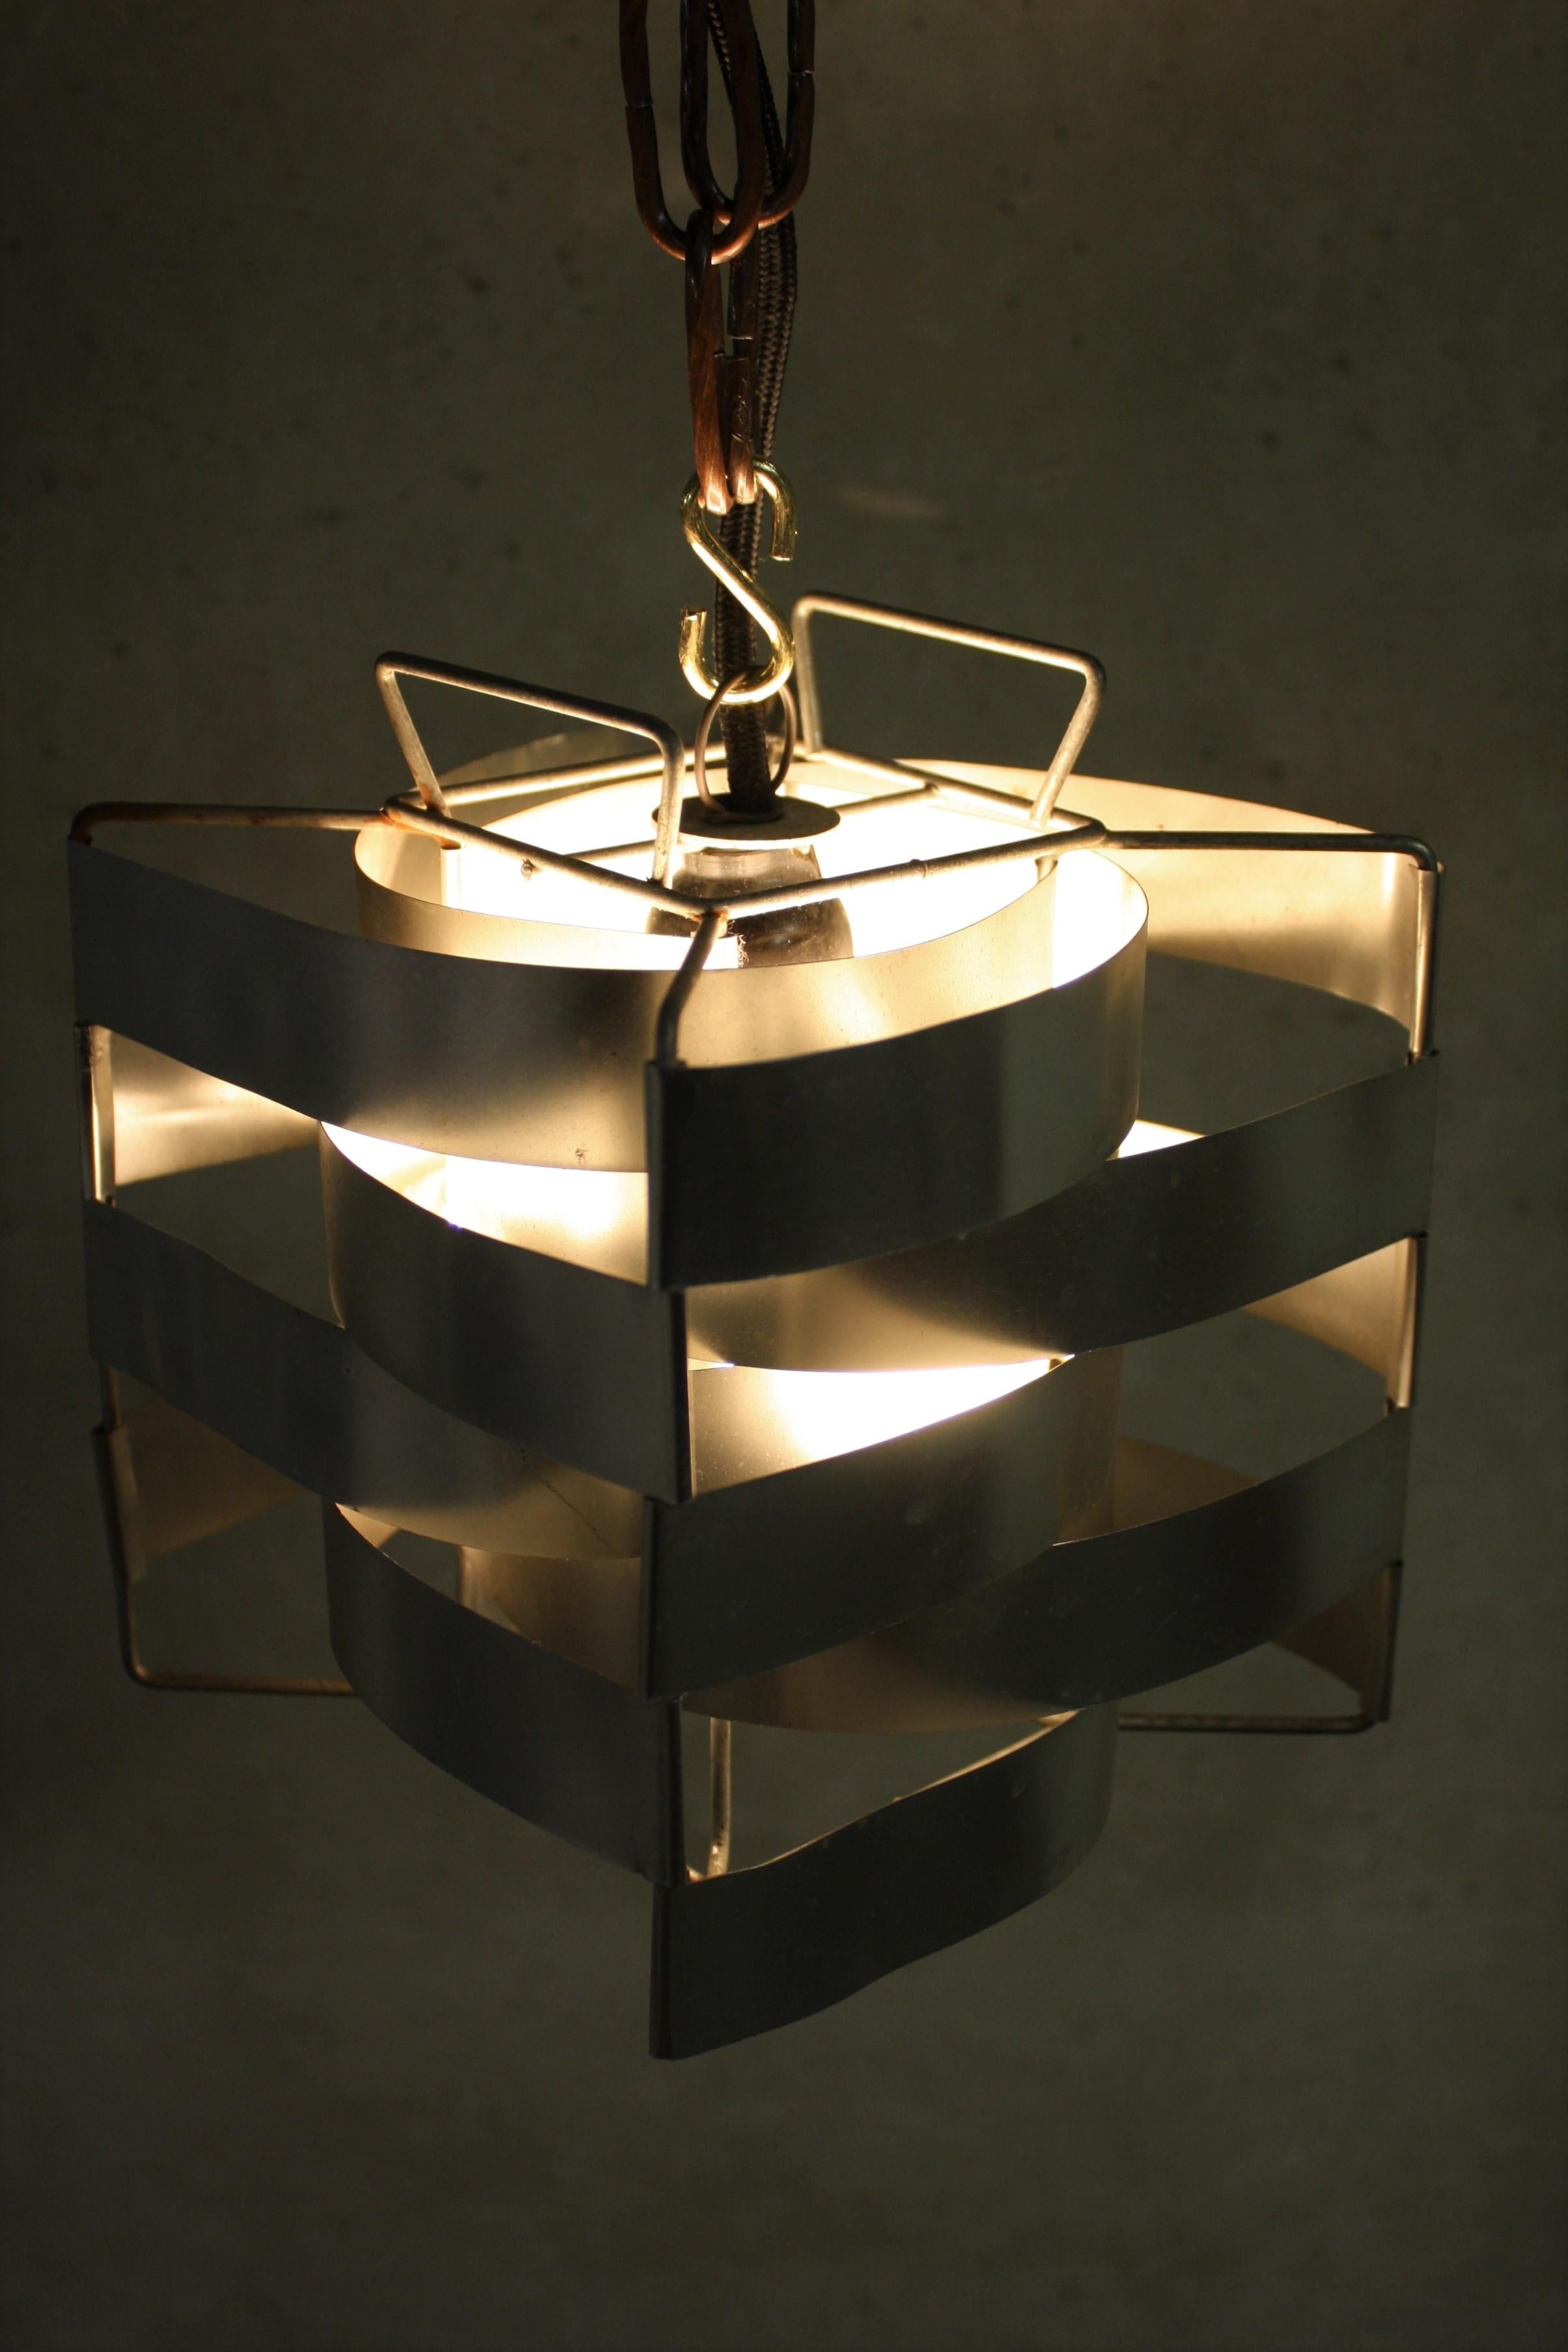 This fantastic cube pendant lamp was designed by the sculptor Max Sauze for the Max Sauze Studio in the 1970s.

The wired frame holds many aluminium bent strips creating a cube structure. 

It creates a warm and amazing light effect.

1970s,